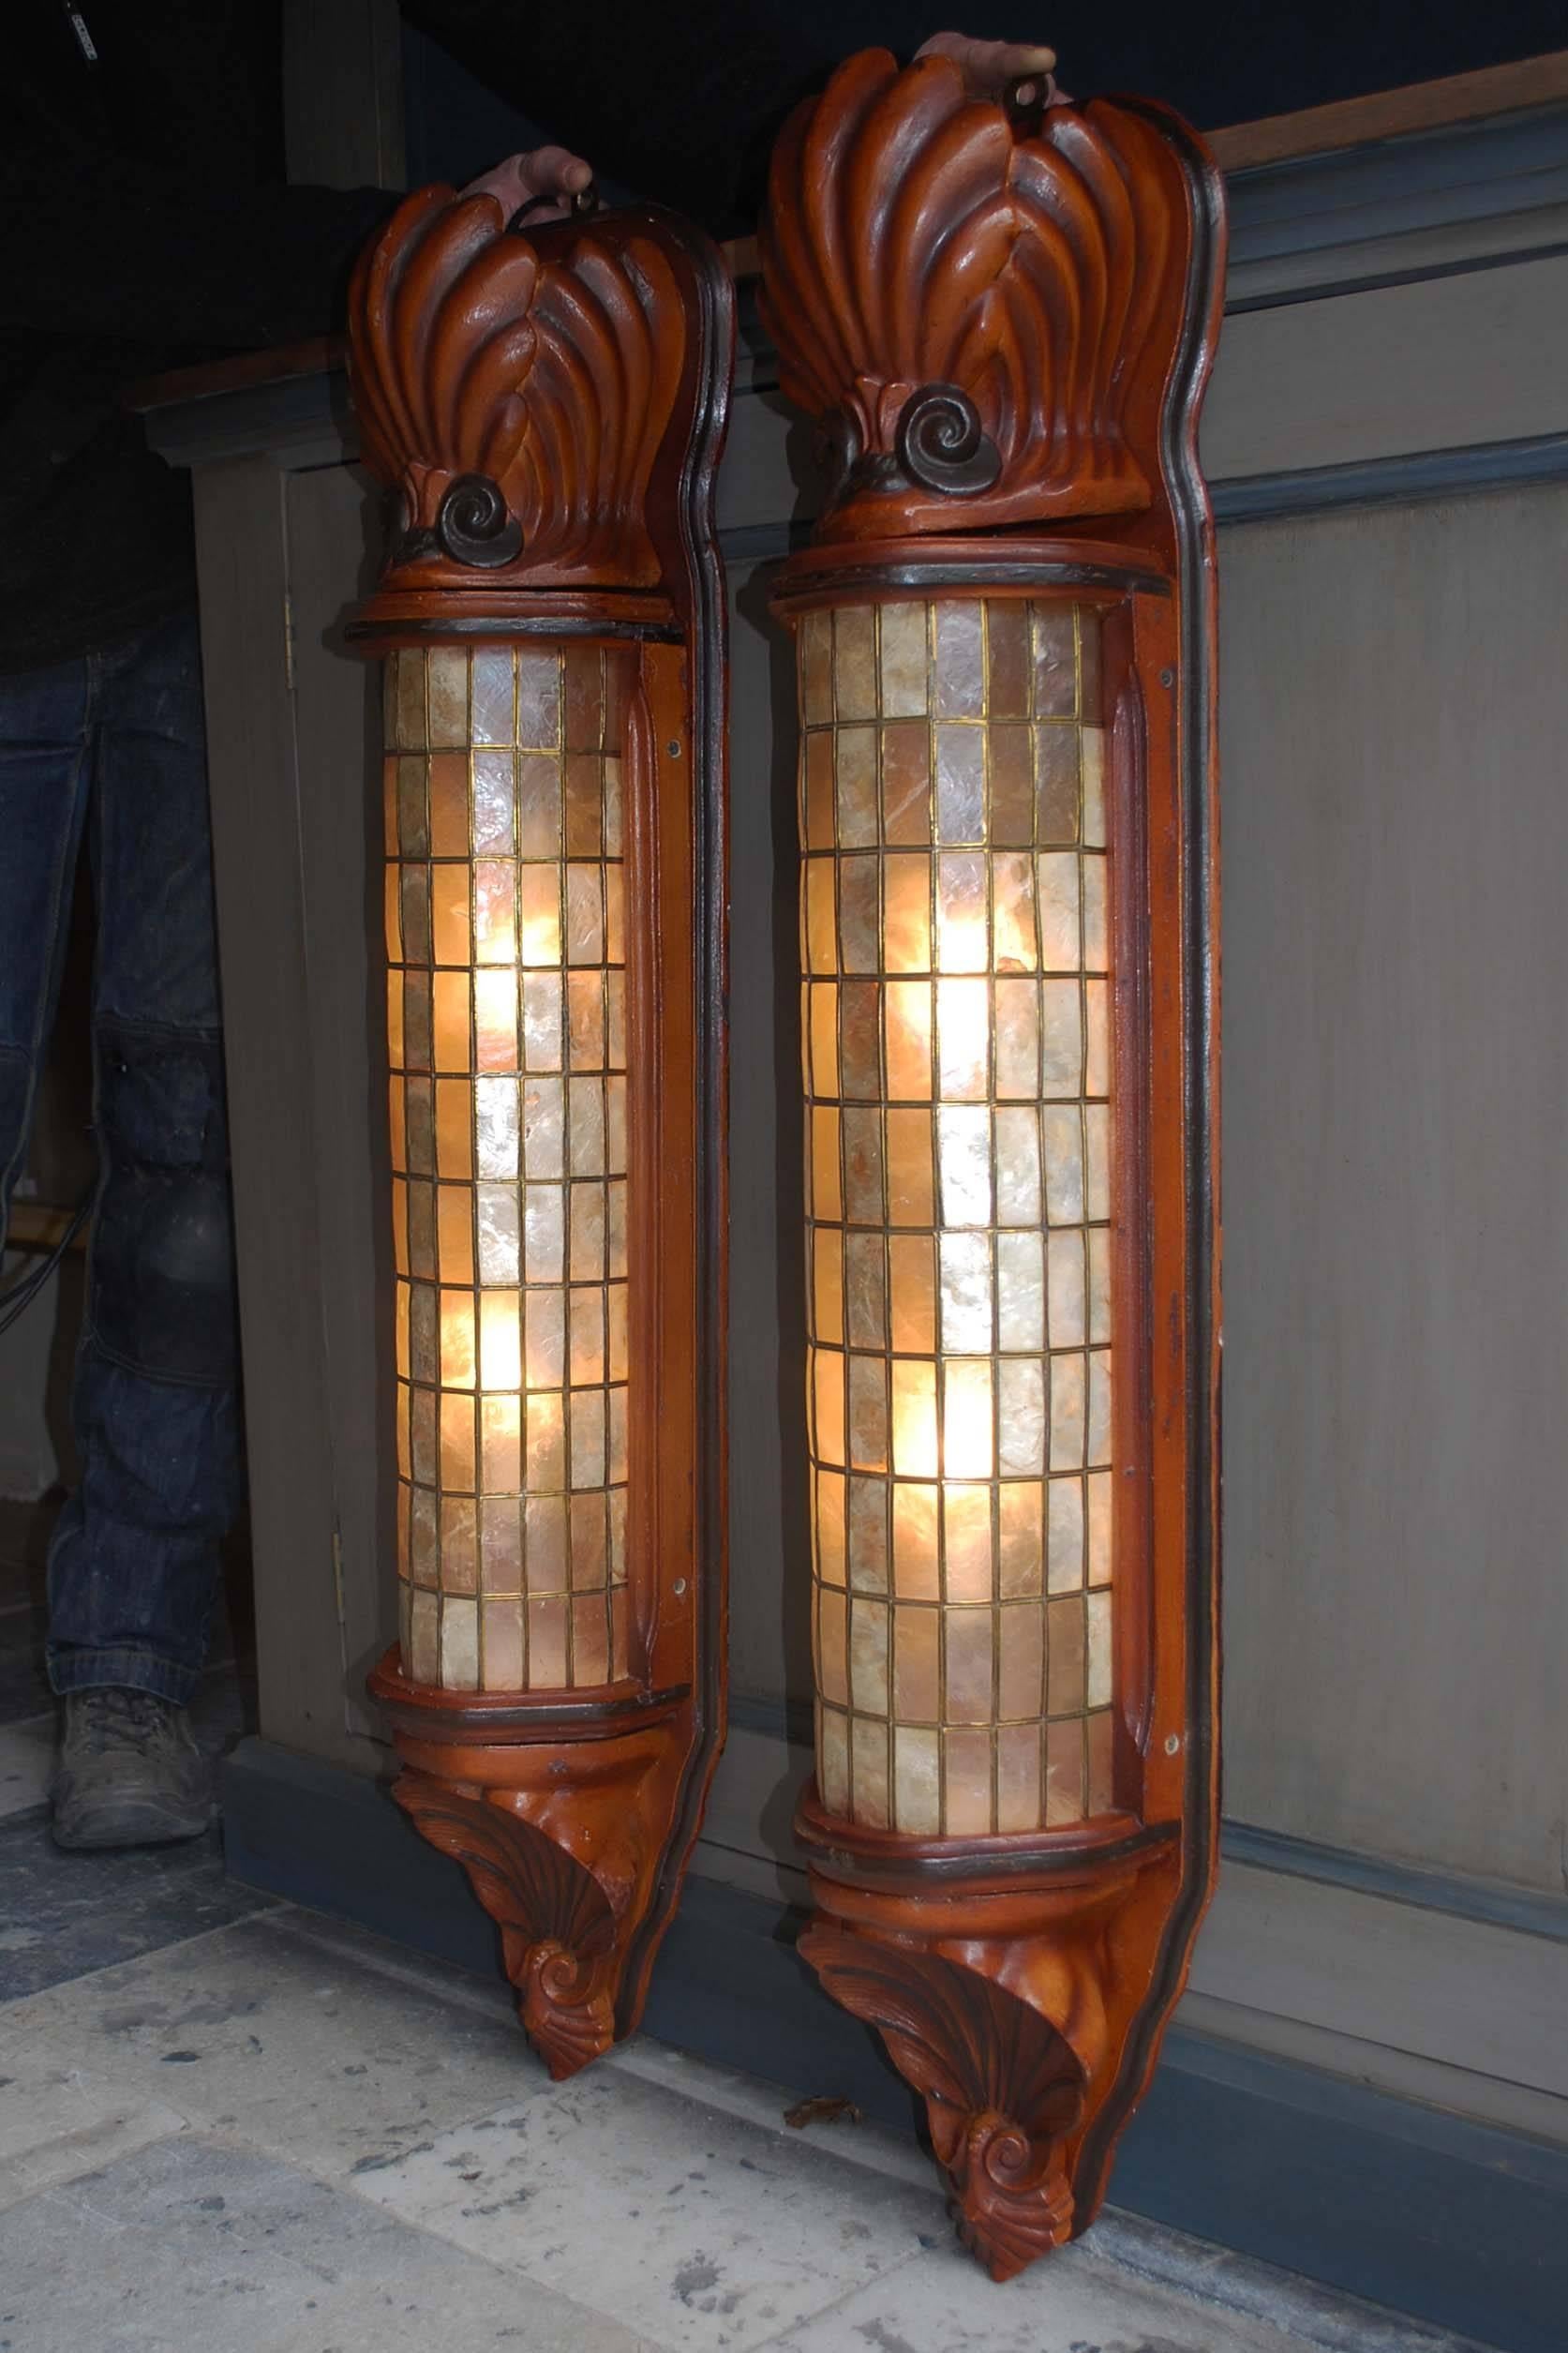 Pair of 20th century theater wall scones made from painted wood and mica (mineral).
New electric wiring. Good working condition.
Originates Belgium, circa 1950.
(Shipping costs on request, depends on destination).